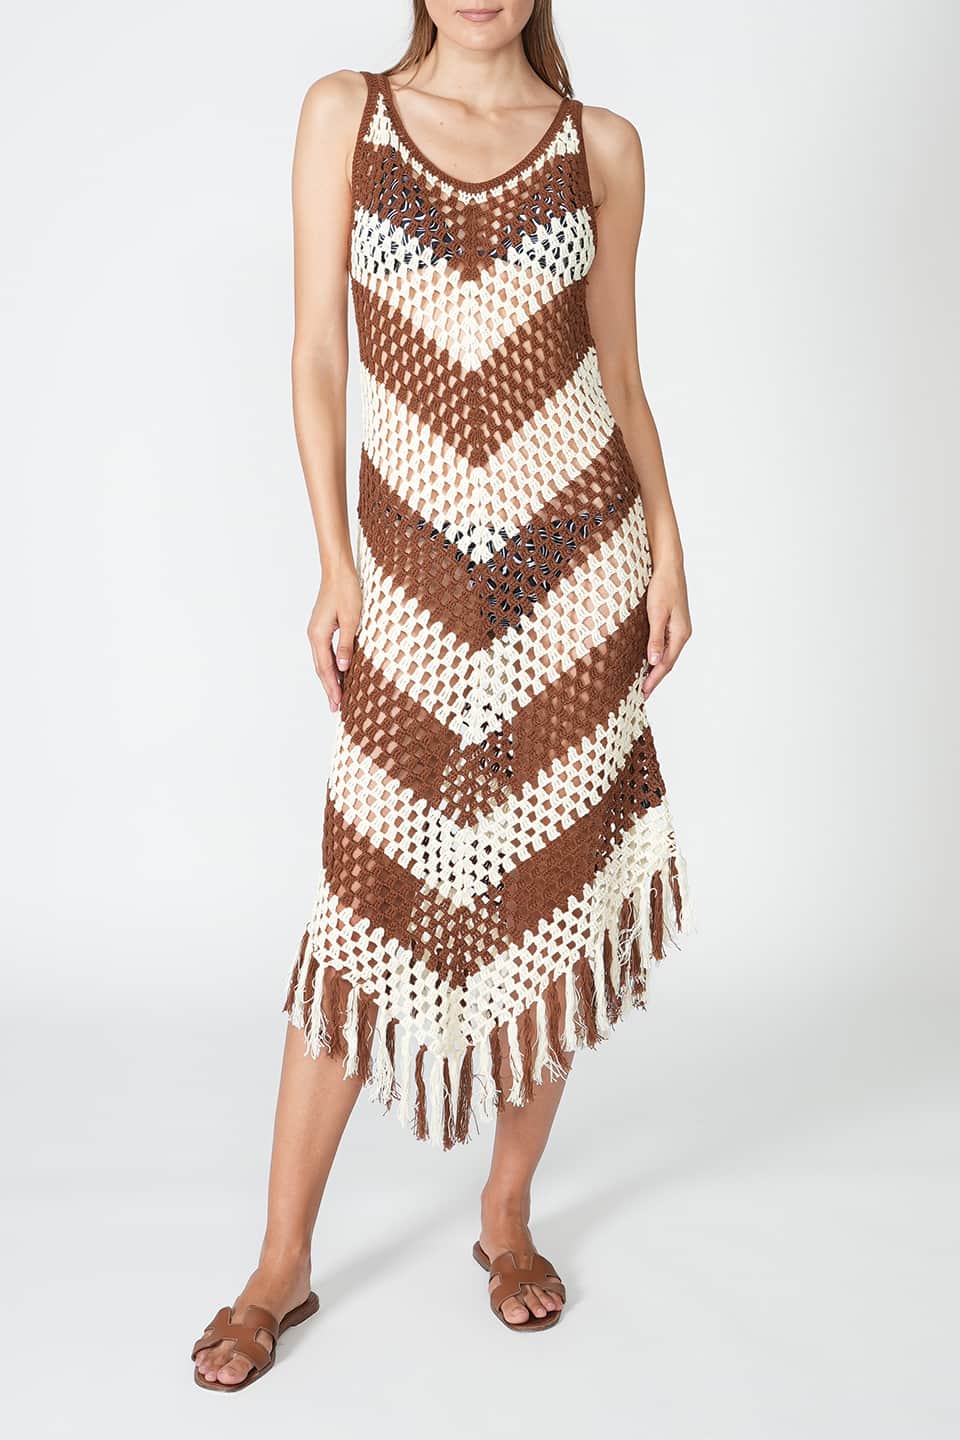 Thumbnail for Product gallery 3, Mellor Dress Brown/Cream